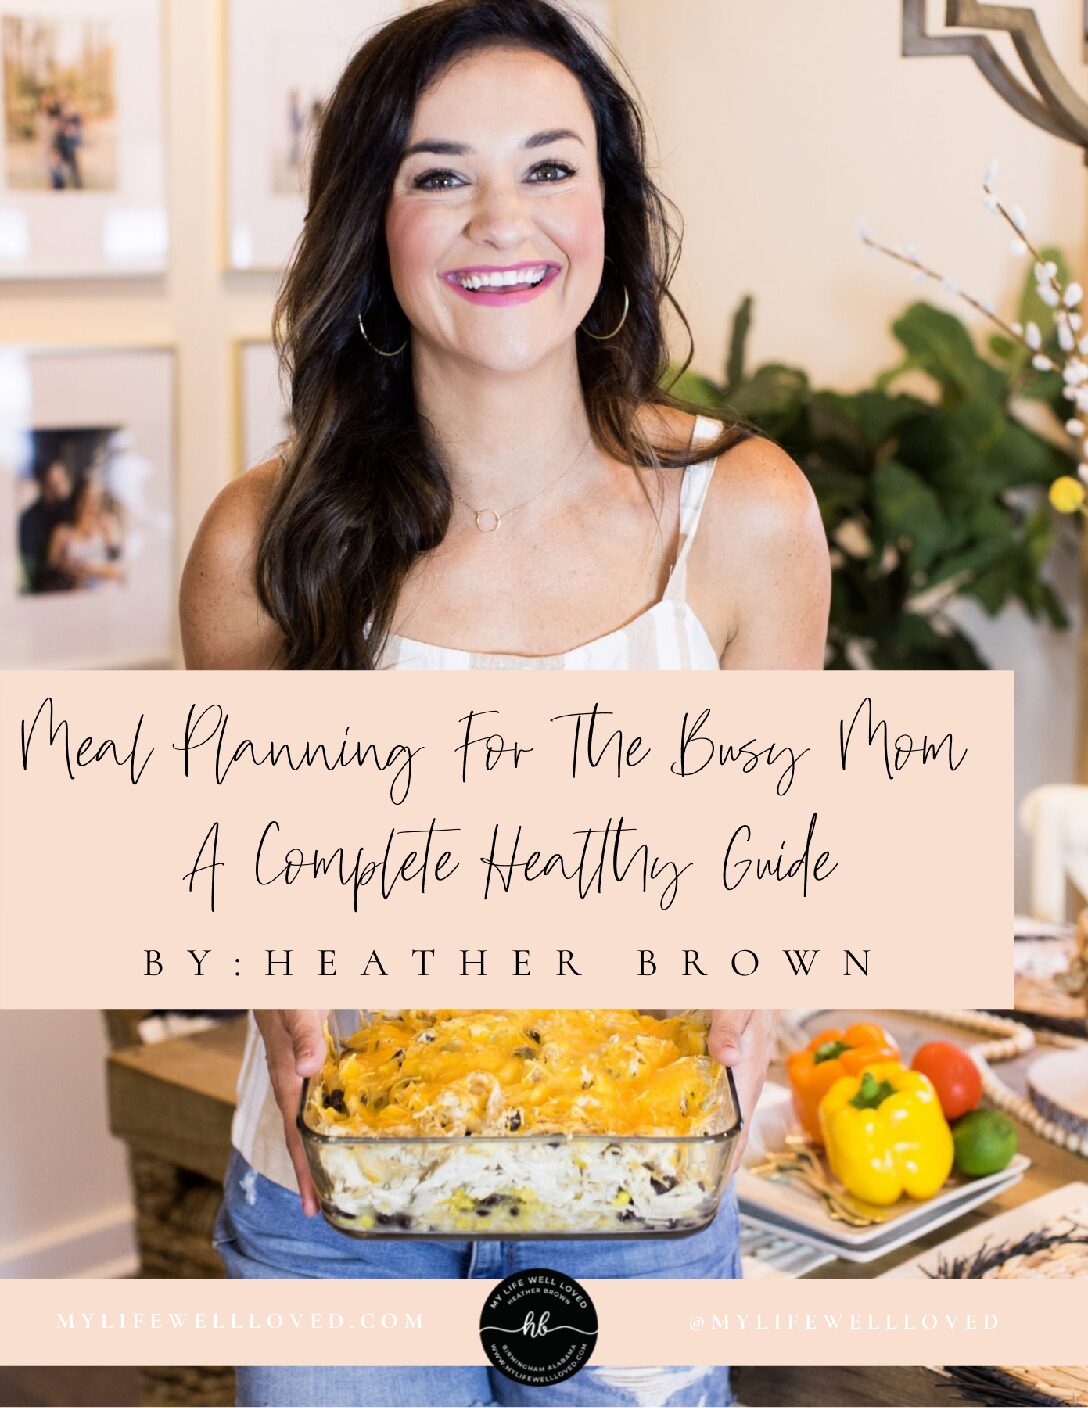 Meal Planning For The Busy Mom: A Complete Guide eBook